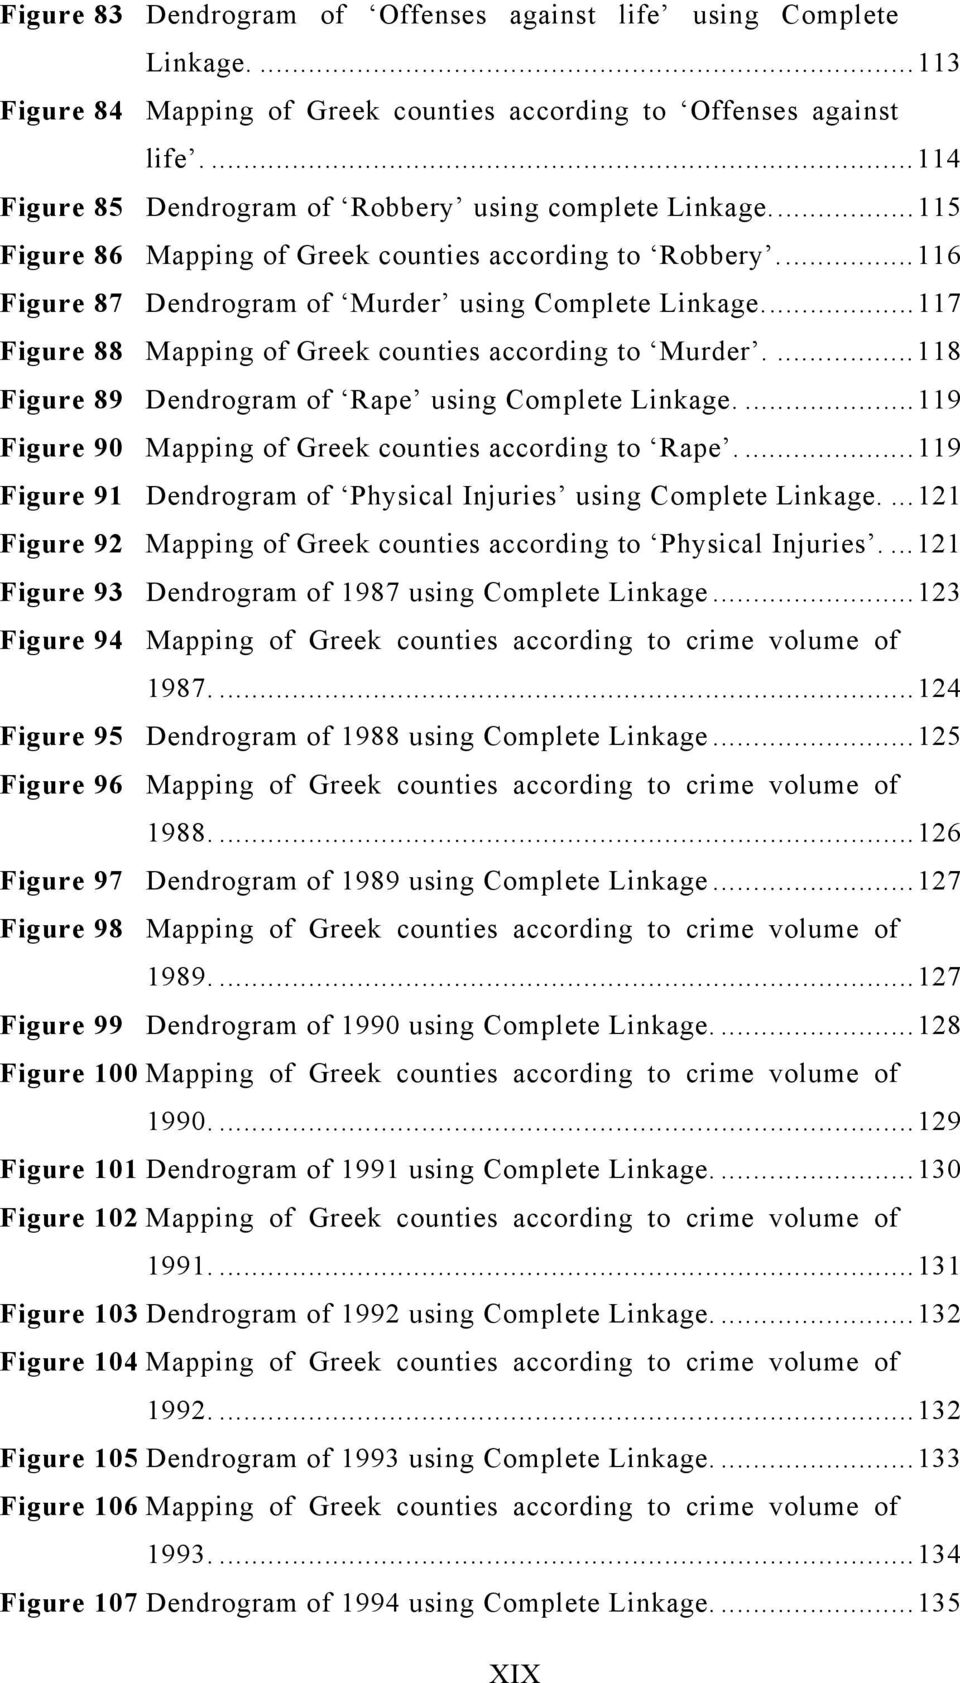 ..117 Figure 88 Mapping of Greek counties according to Murder....118 Figure 89 Dendrogram of Rape using Complete Linkage....119 Figure 90 Mapping of Greek counties according to Rape.